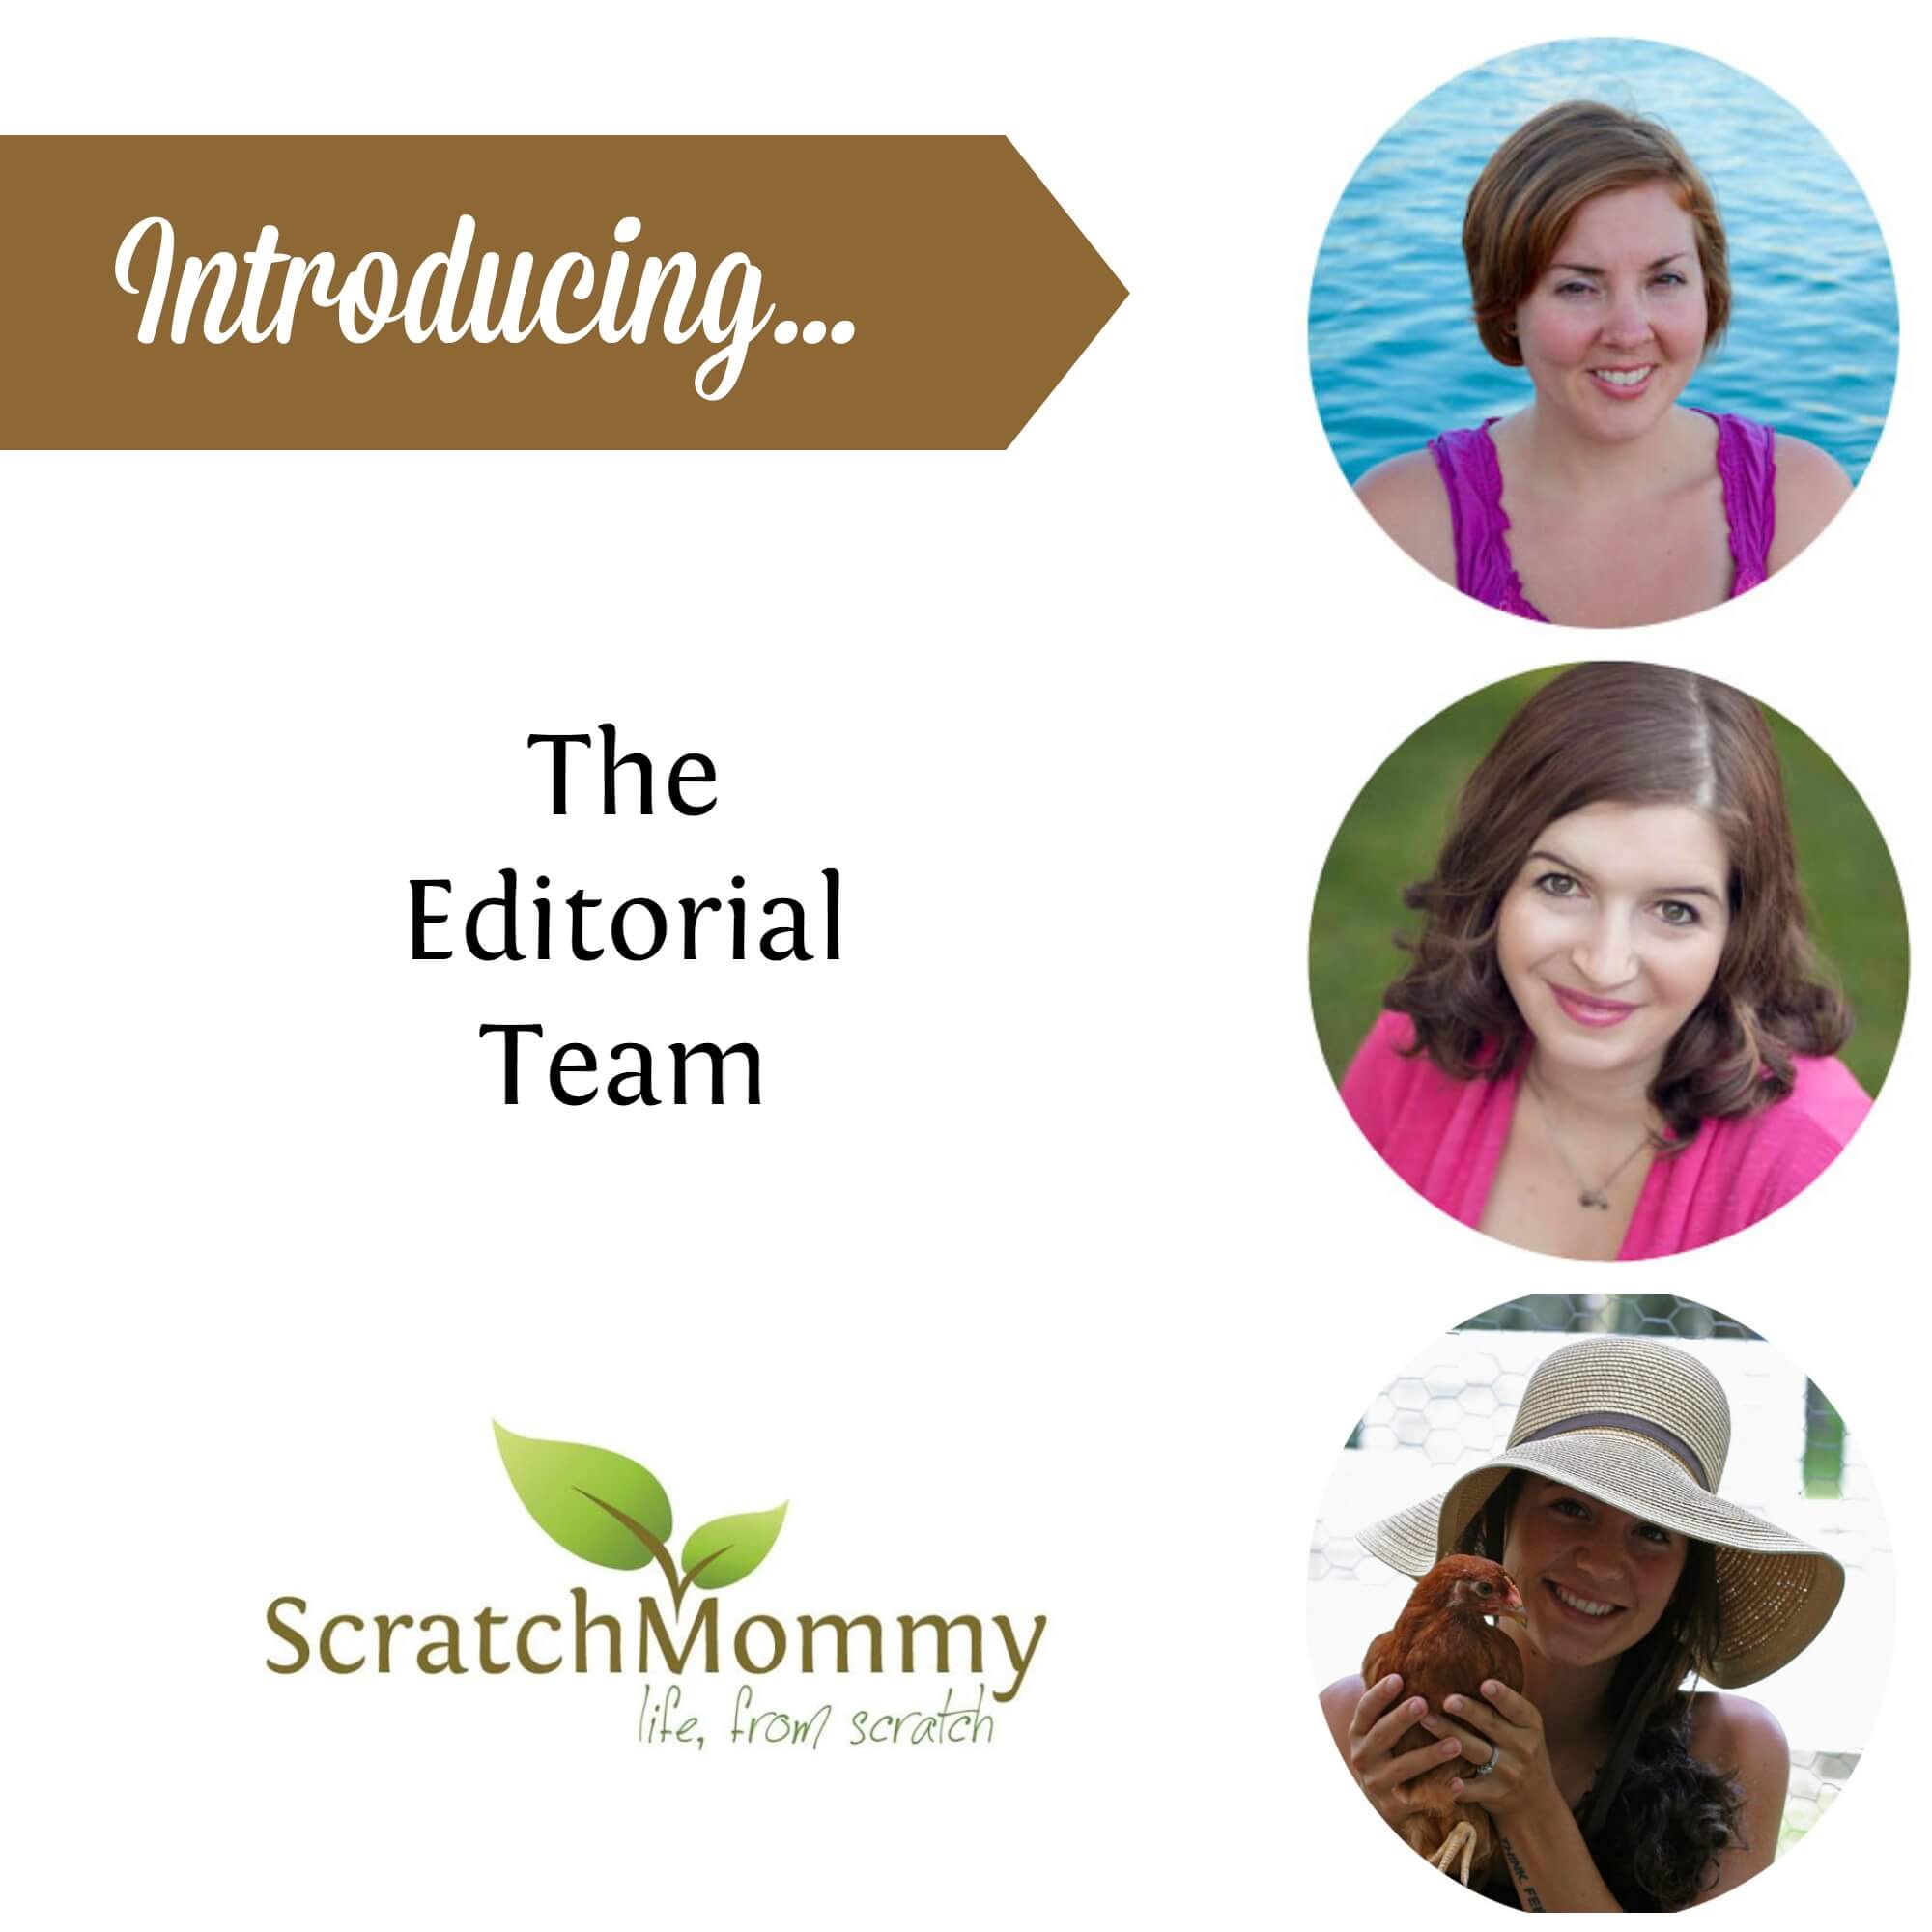 Stoked to tell you all about the insanely awesome Scratch Mommy Editorial Team! We've got quite the interesting little family here to make things run. You've just got to meet them!